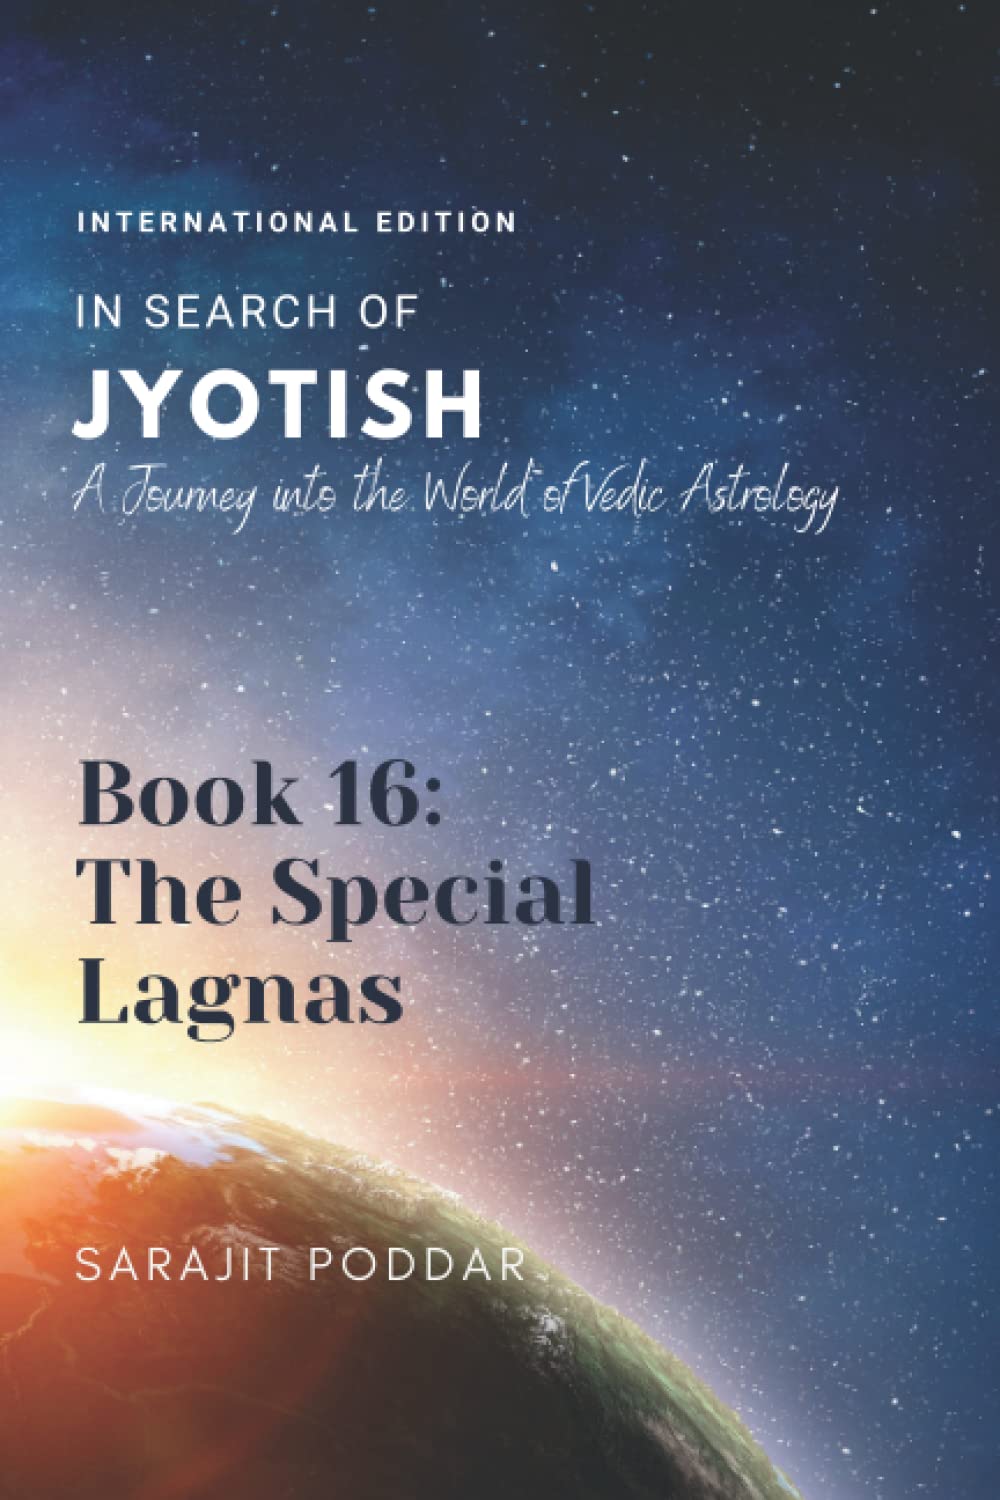 The Special Lagnas: A Journey into the World of Vedic Astrology